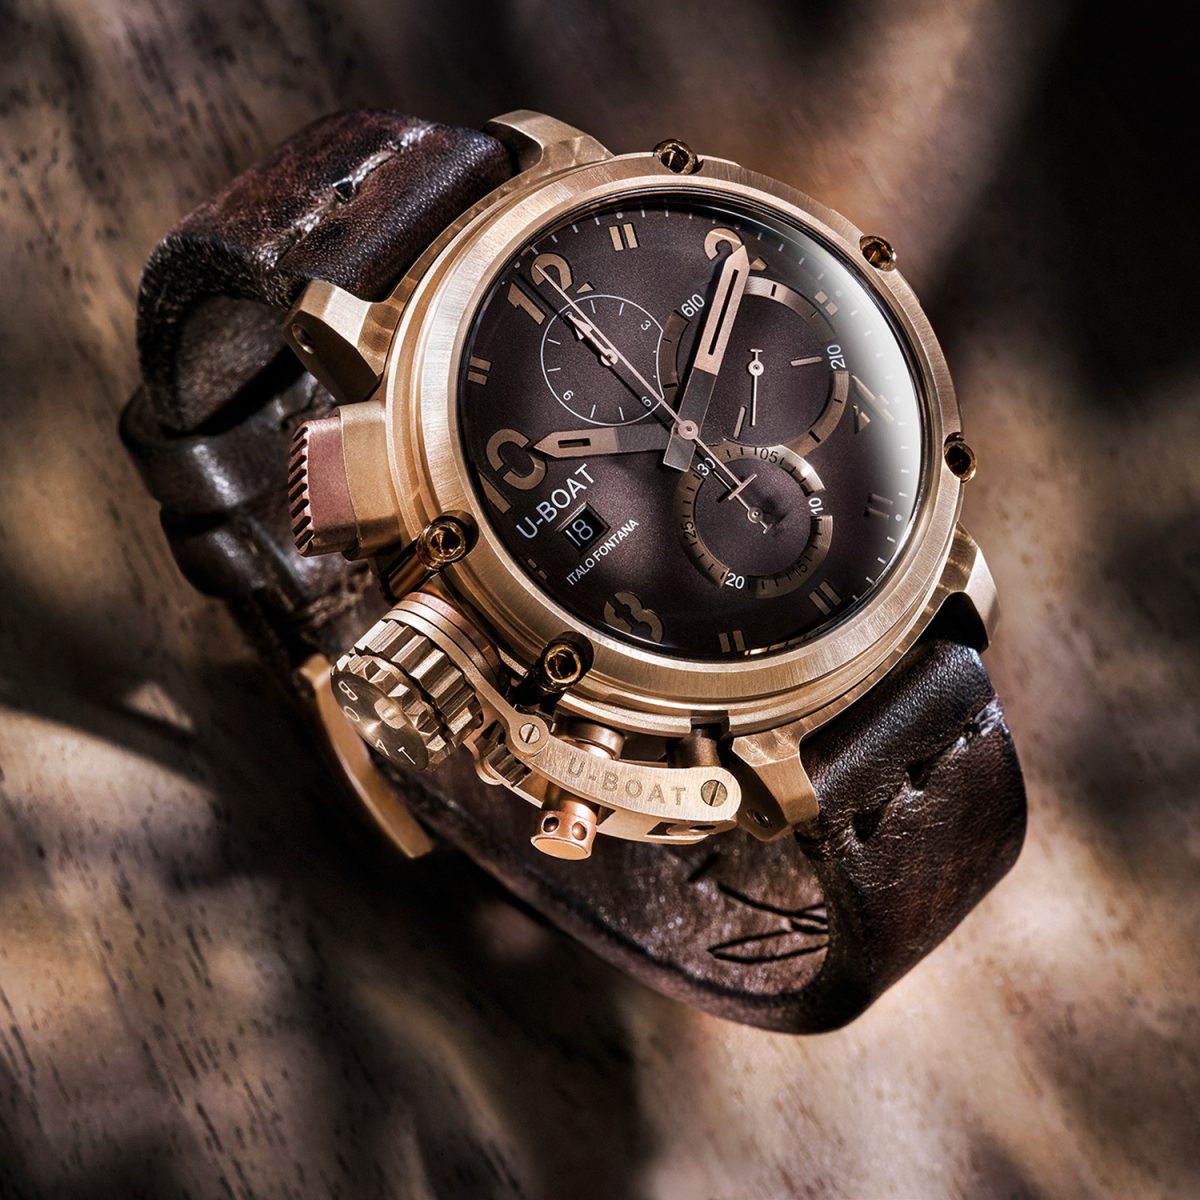 The 46 mm replica watches have brown straps.